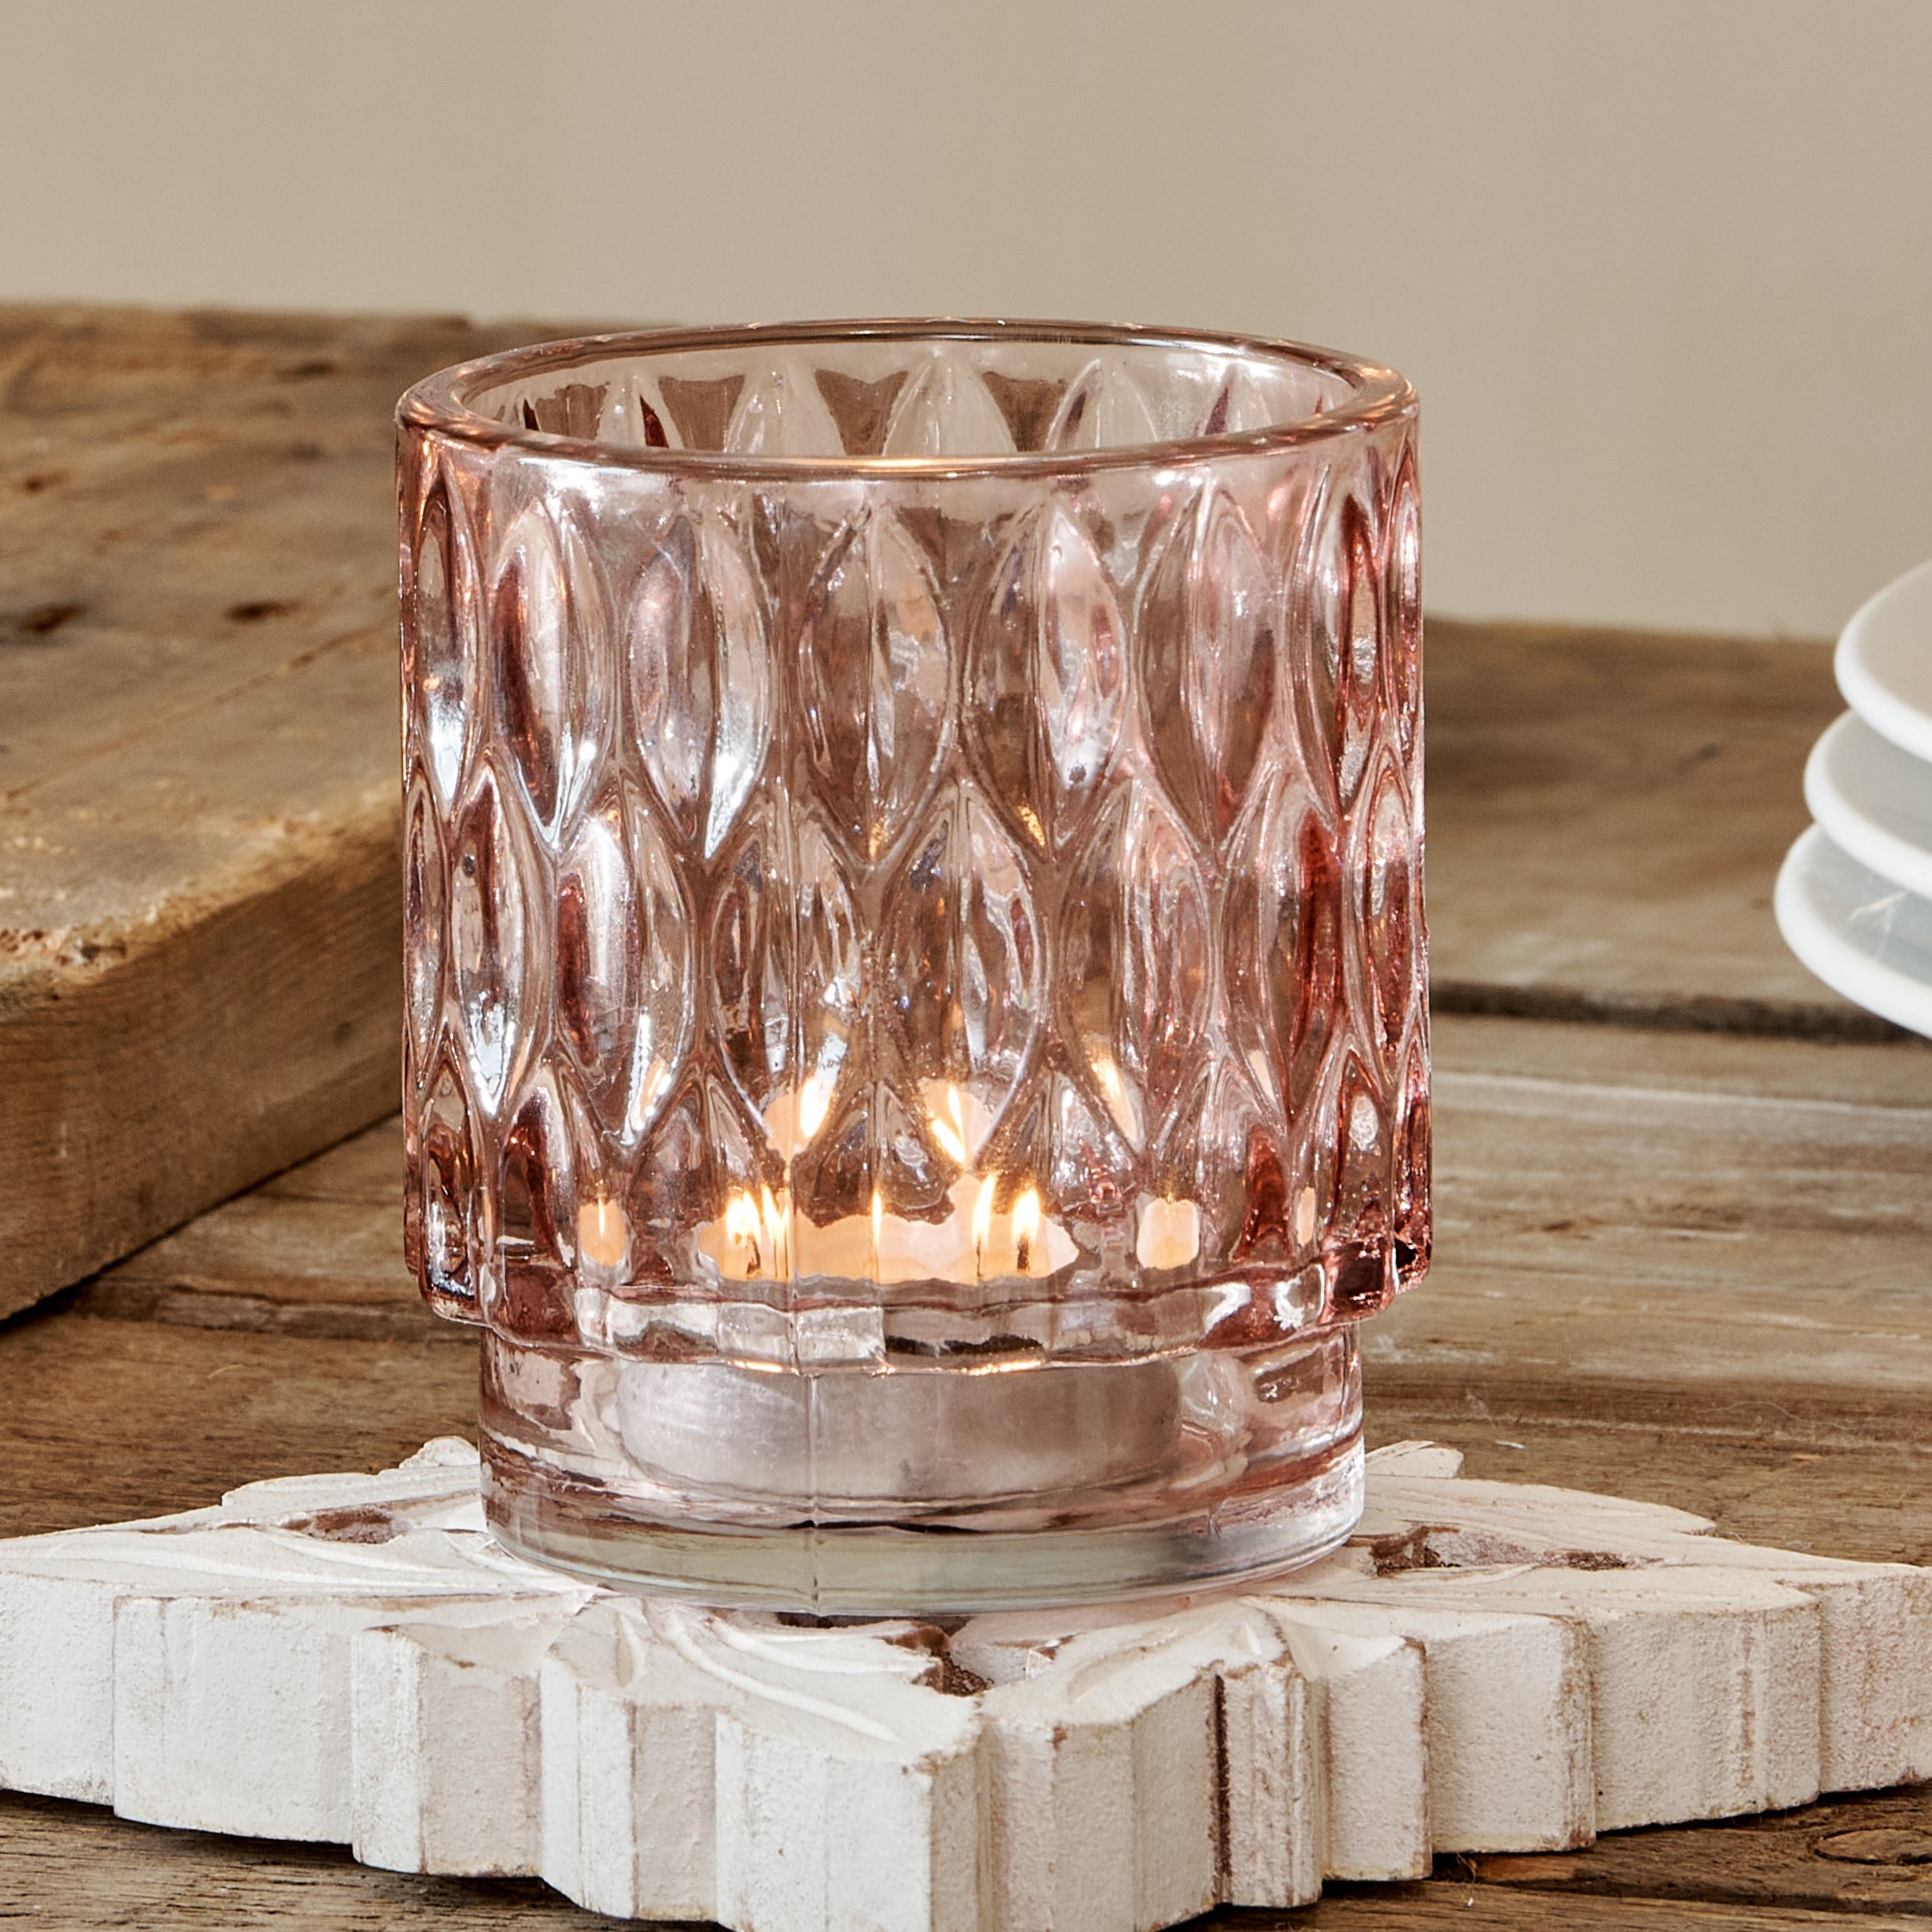 Pink glass tealight holder on white carved coaster on wooden table